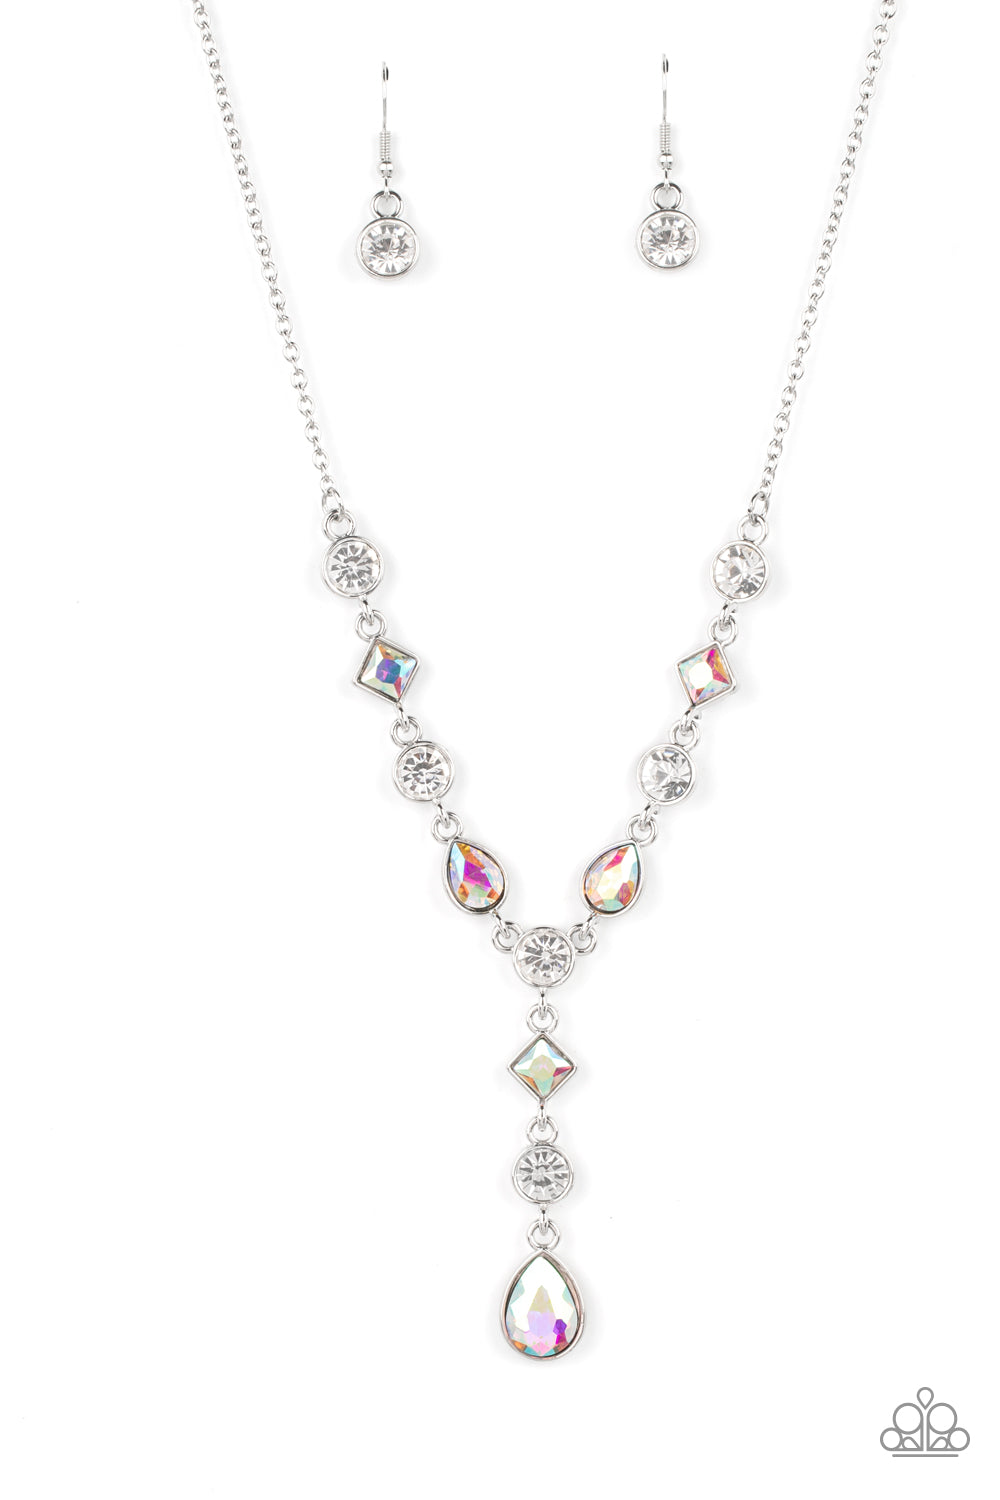 Forget the Crown - Iridescent and Silver Necklace - Paparazzi Accessories - Brilliant white round-cut rhinestones alternate between diamonds and teardrops with an iridescent finish, creating an elegant lariat fit for royalty. Due to its prismatic palette, color may vary. Features an adjustable clasp closure. Sold as one individual necklace.